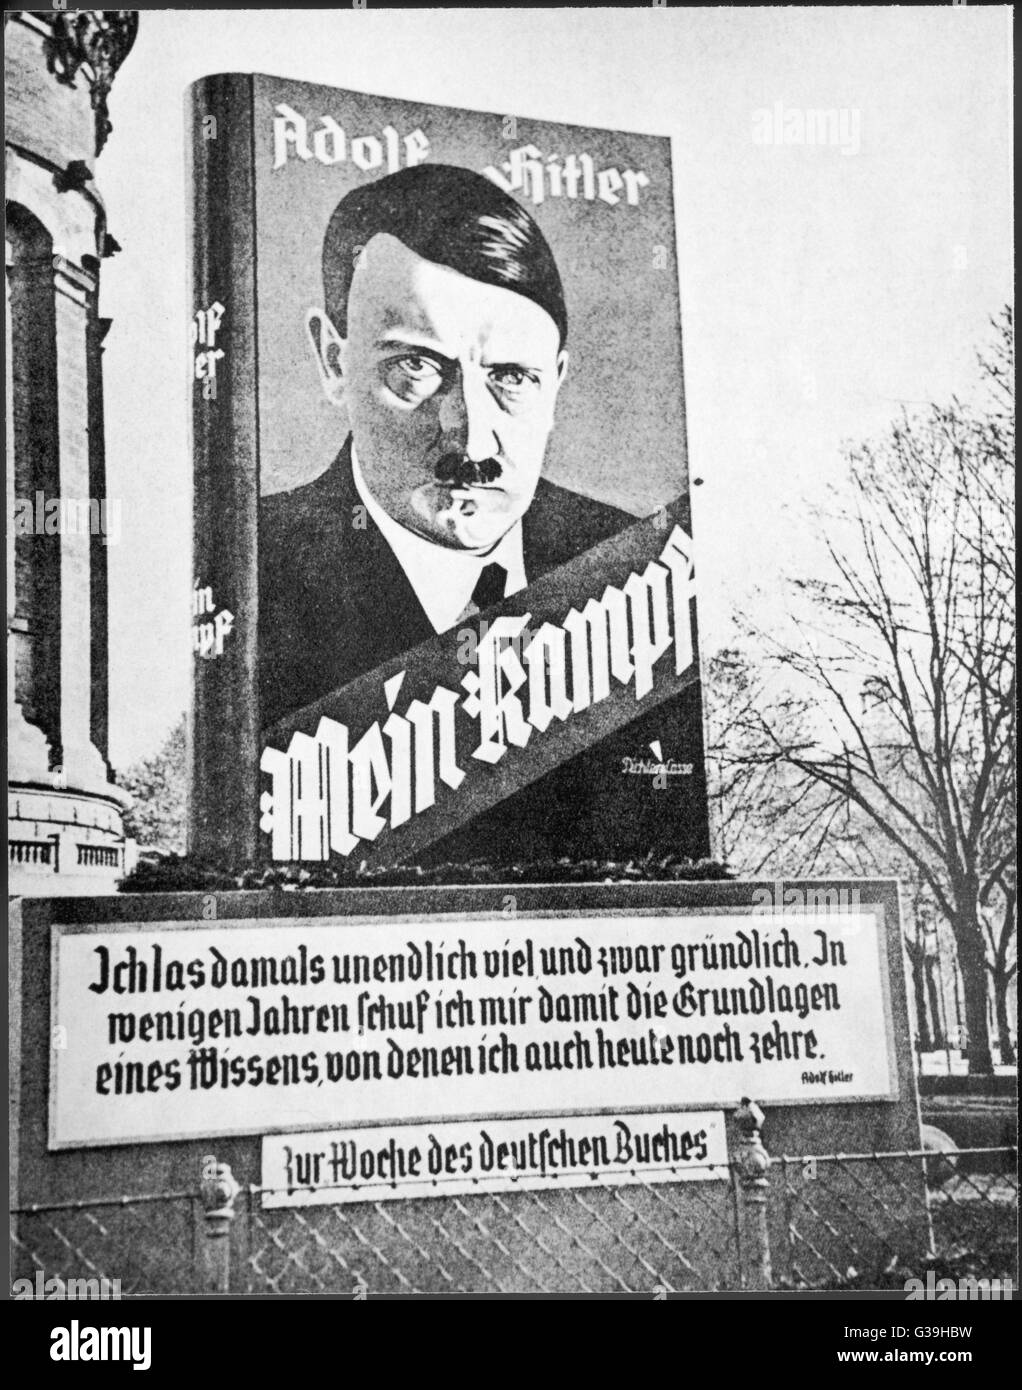 Advertisement hoarding for  Mein Kampf (My Struggle) by  Adolf Hitler.  It must have  worked - by 1939 5.2 million  copies had been sold. Stock Photo